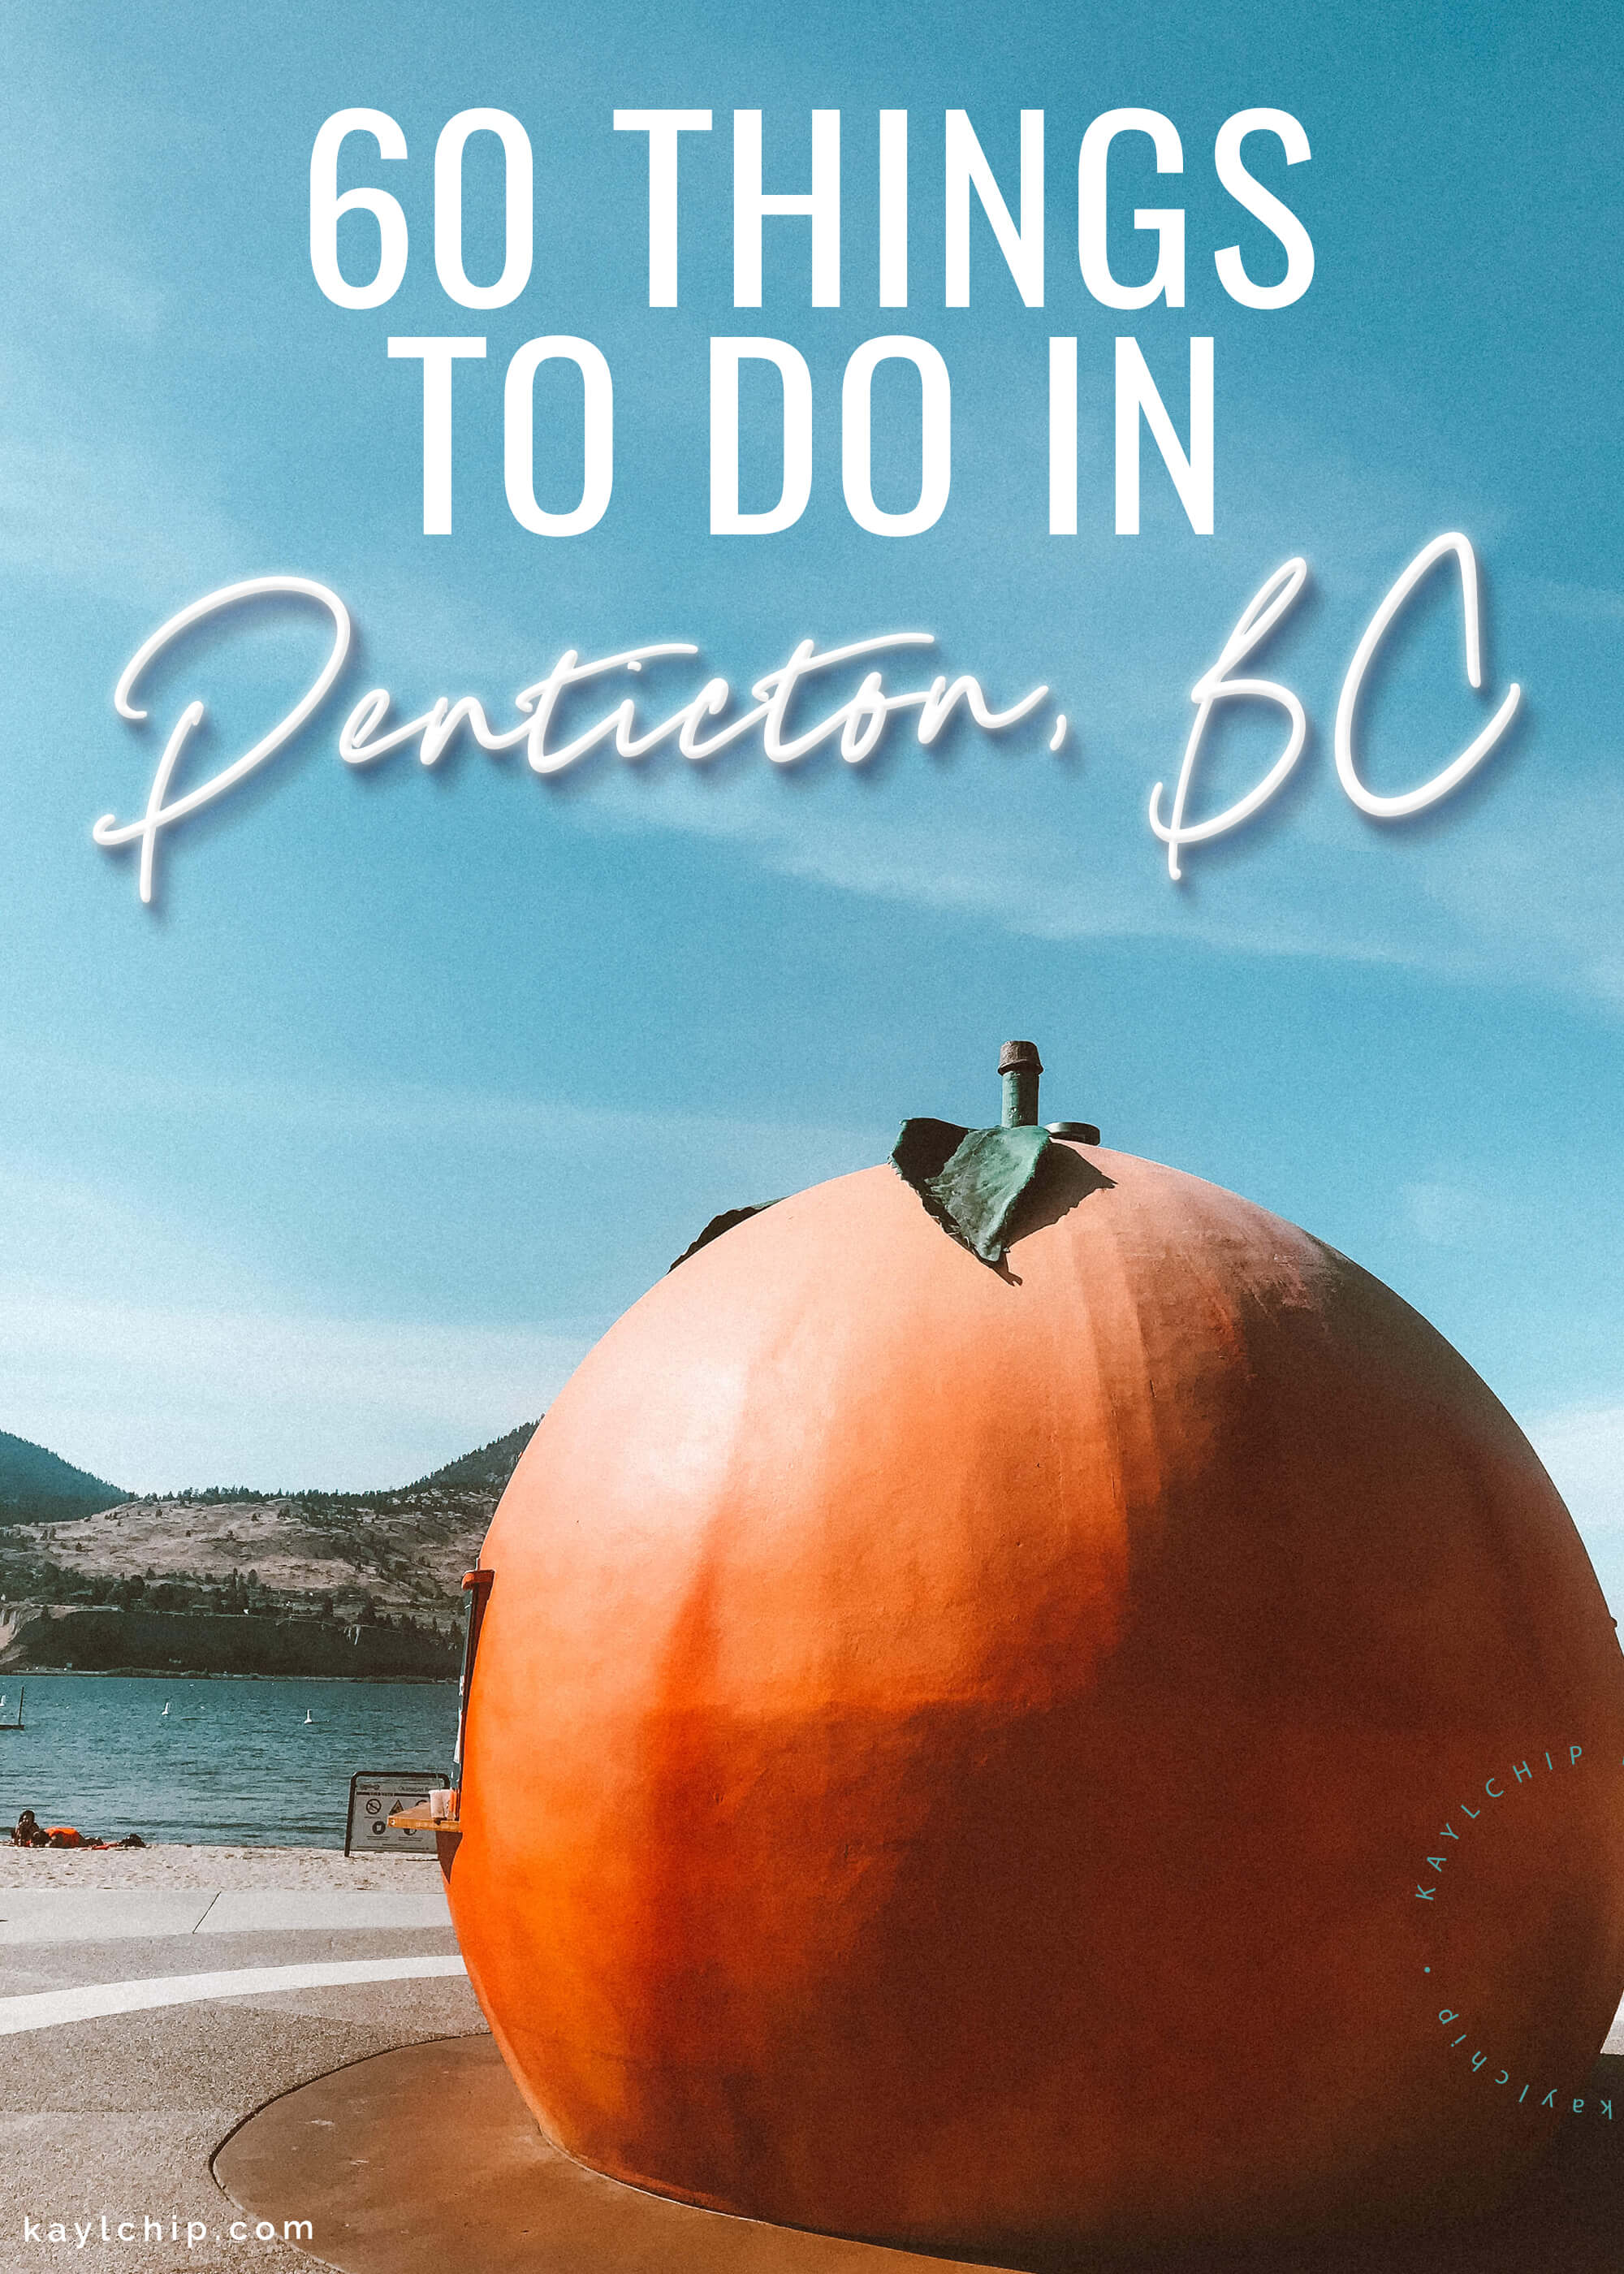 Things to Do Penticton, BC